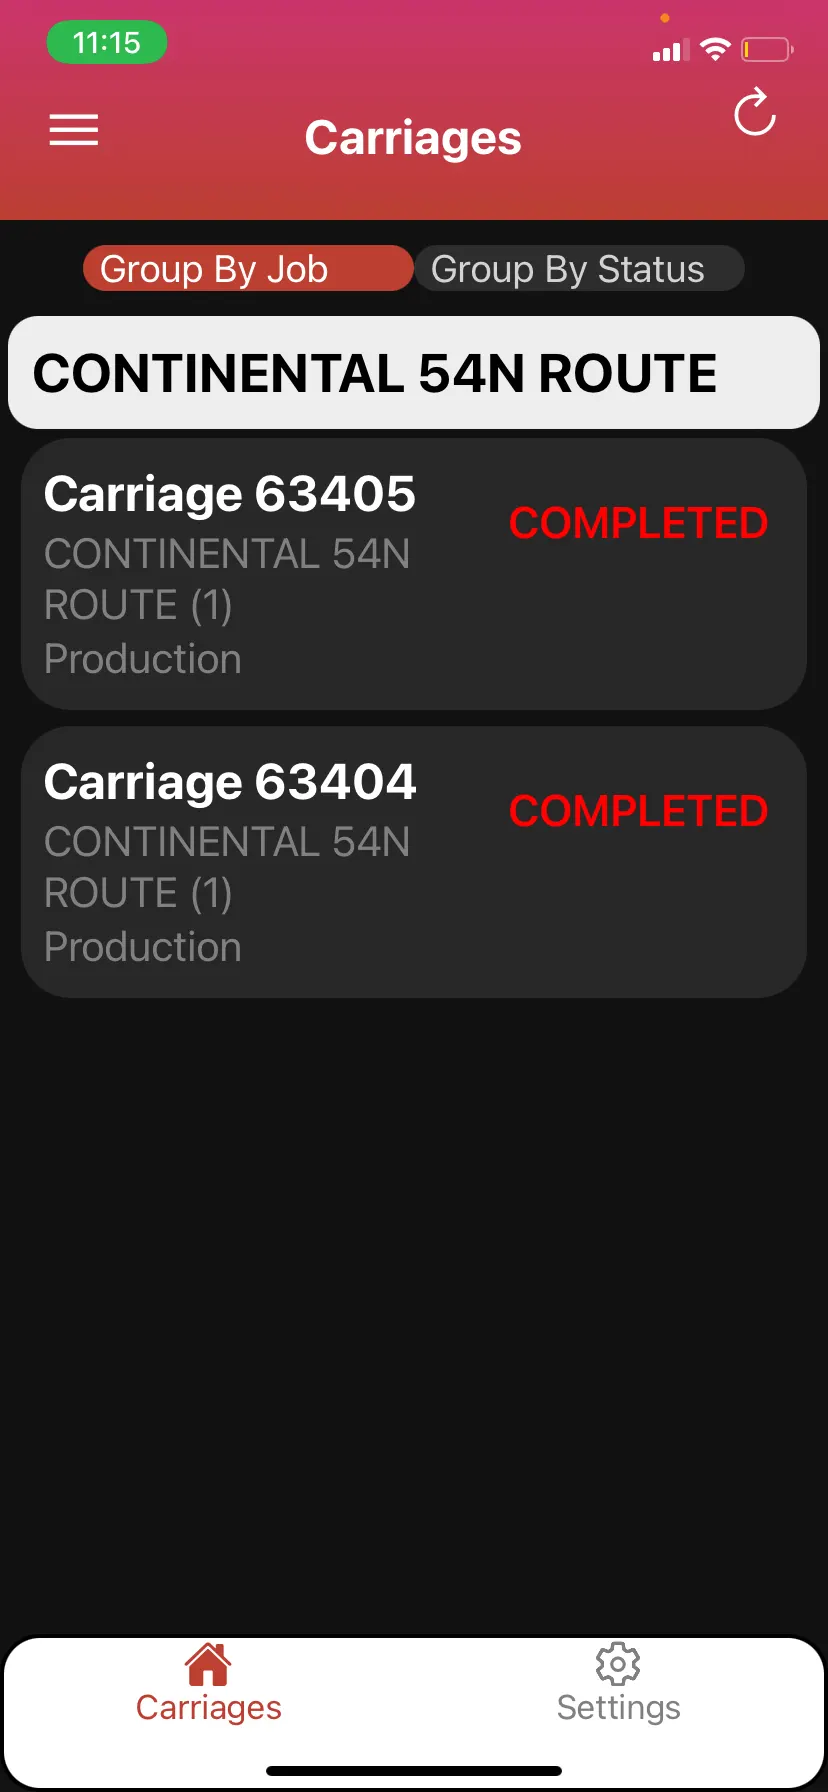 And your carriage on the carriage page has changed to completed.